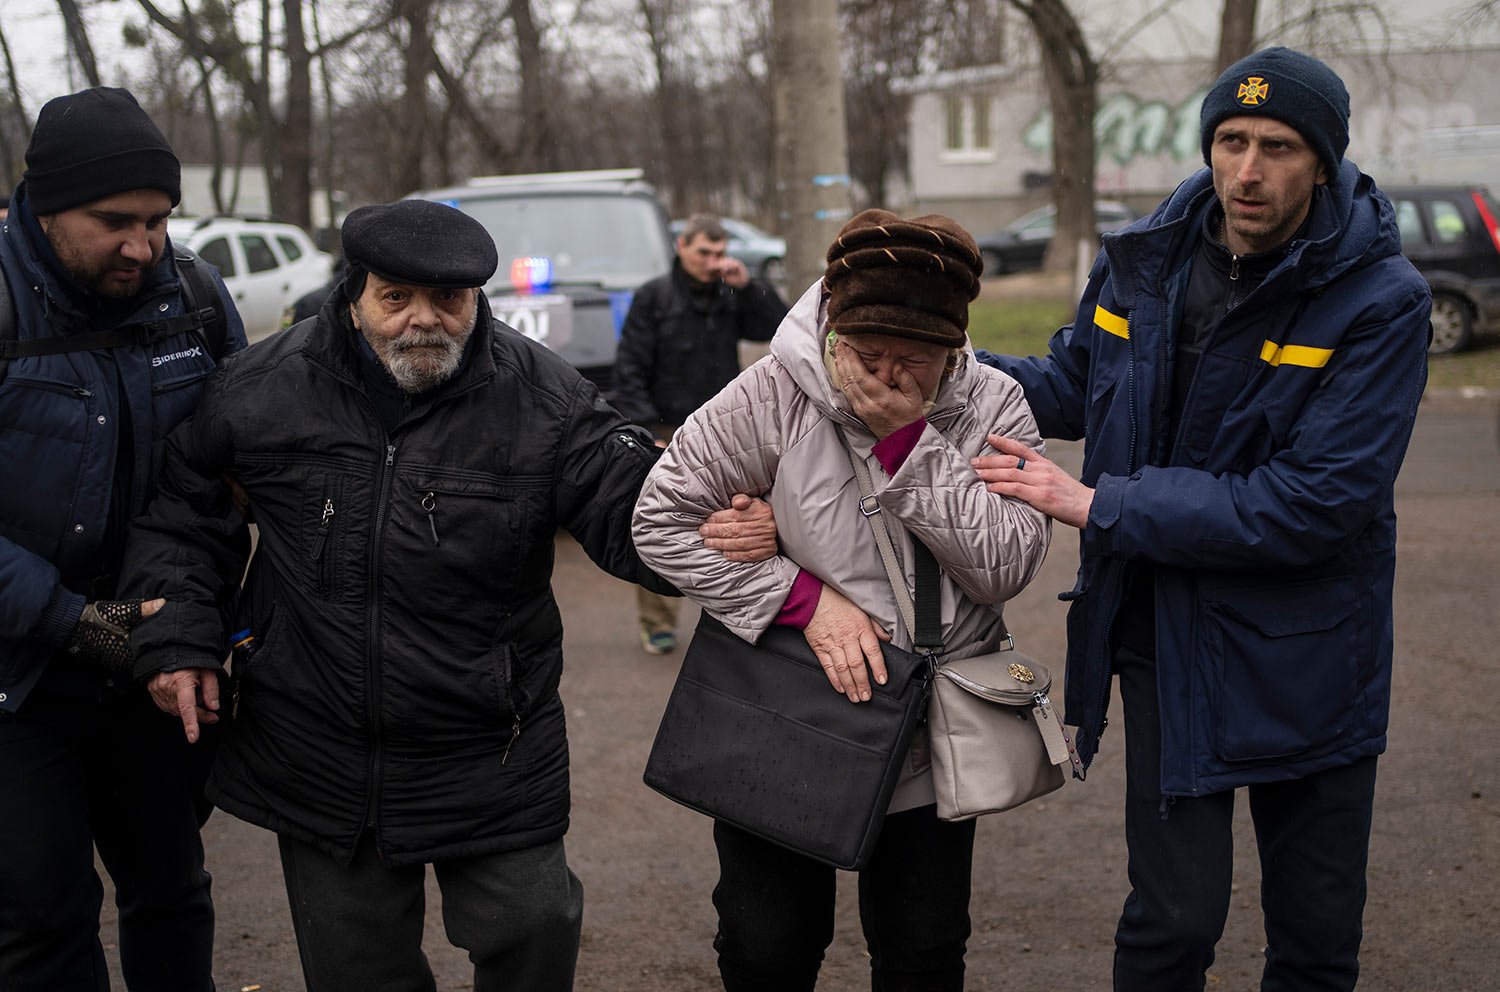  Residents evacuated from Irpin arrive at an assistance center on the outskirts of Kyiv, Ukraine, Wednesday, March 30, 2022. (AP Photo/Rodrigo Abd) 